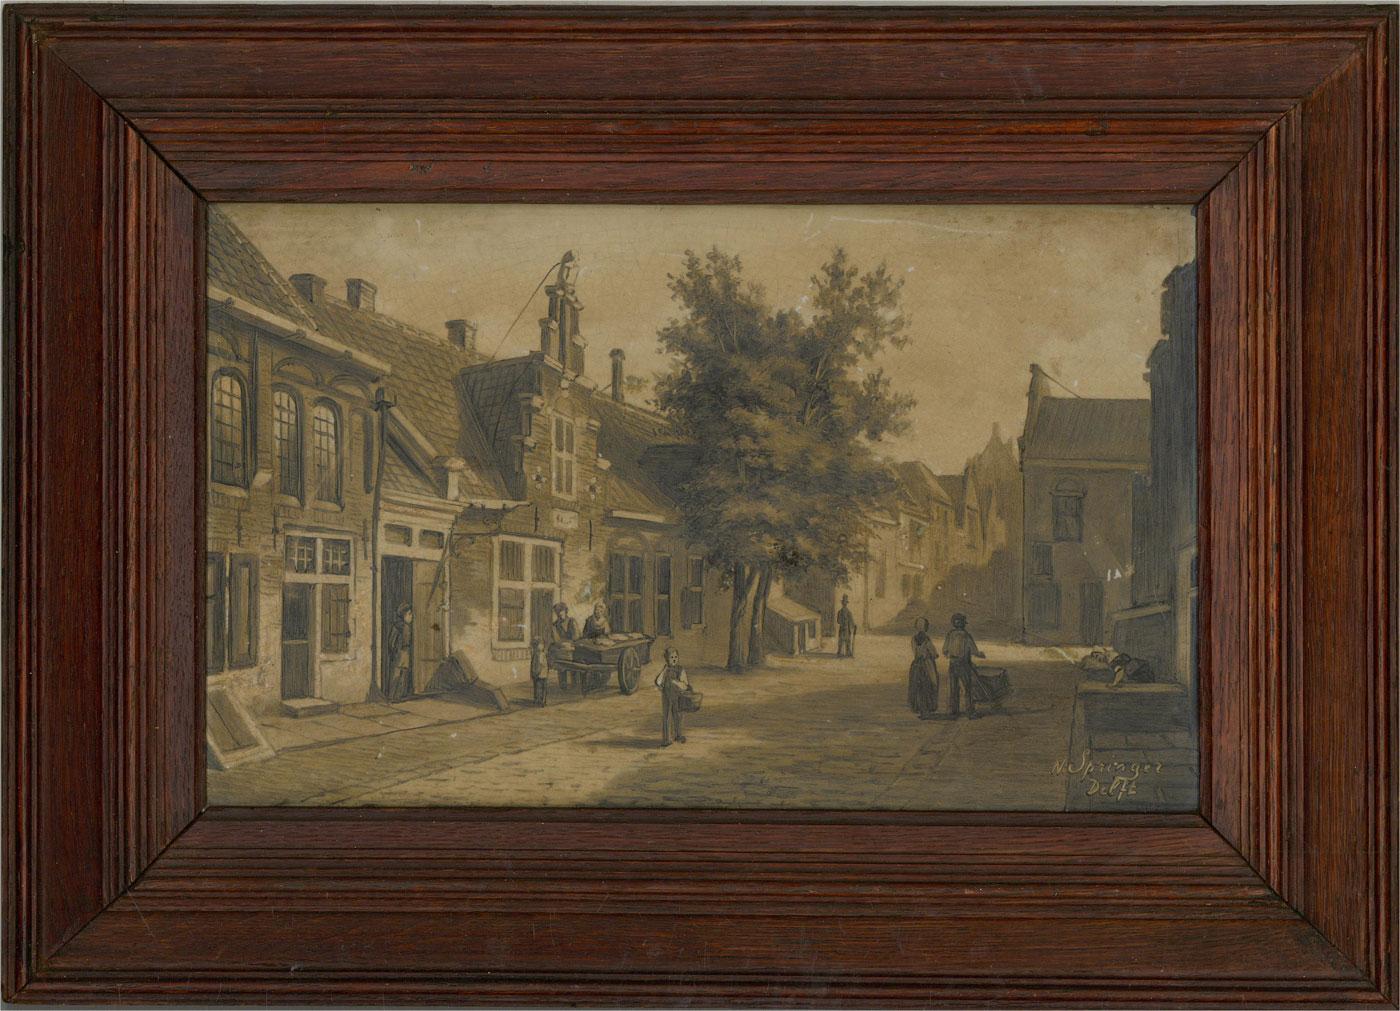 An unusual late 19th Century Dutch street scene showing a cobbled street with gabled buildings bathed in sunlight. The artist has signed and inscribed to the lower right corner. The painting is on a large ceramic Delft tile and presented in a